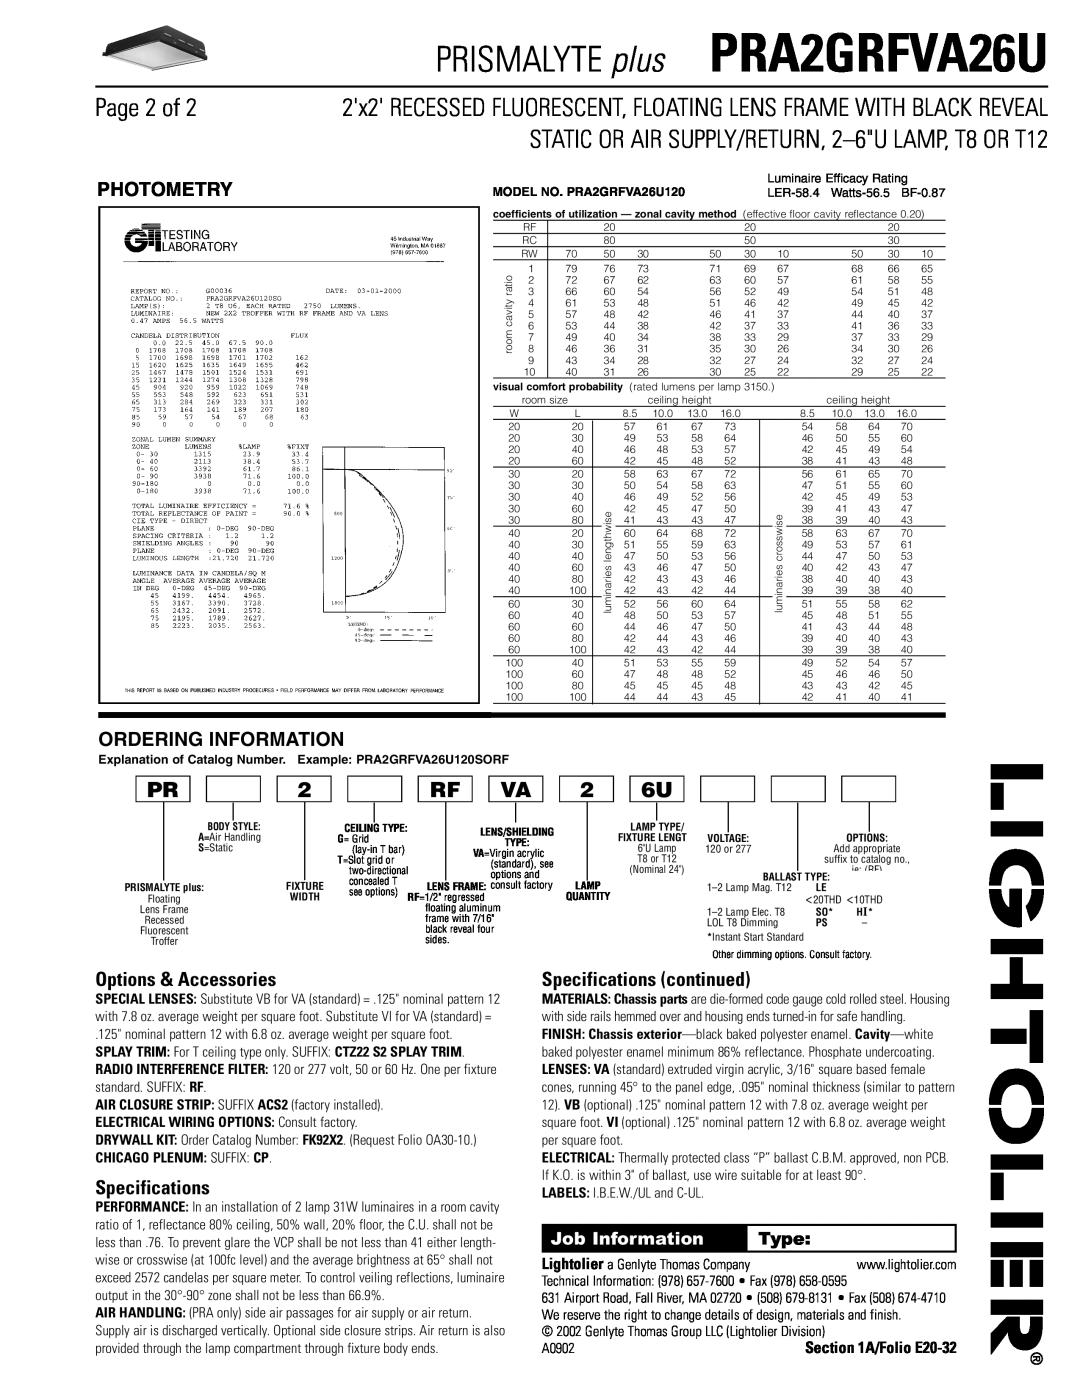 Lightolier PRA2GRFVA26U dimensions Page 2 of, Photometry, Ordering Information, Options & Accessories, Specifications, Type 